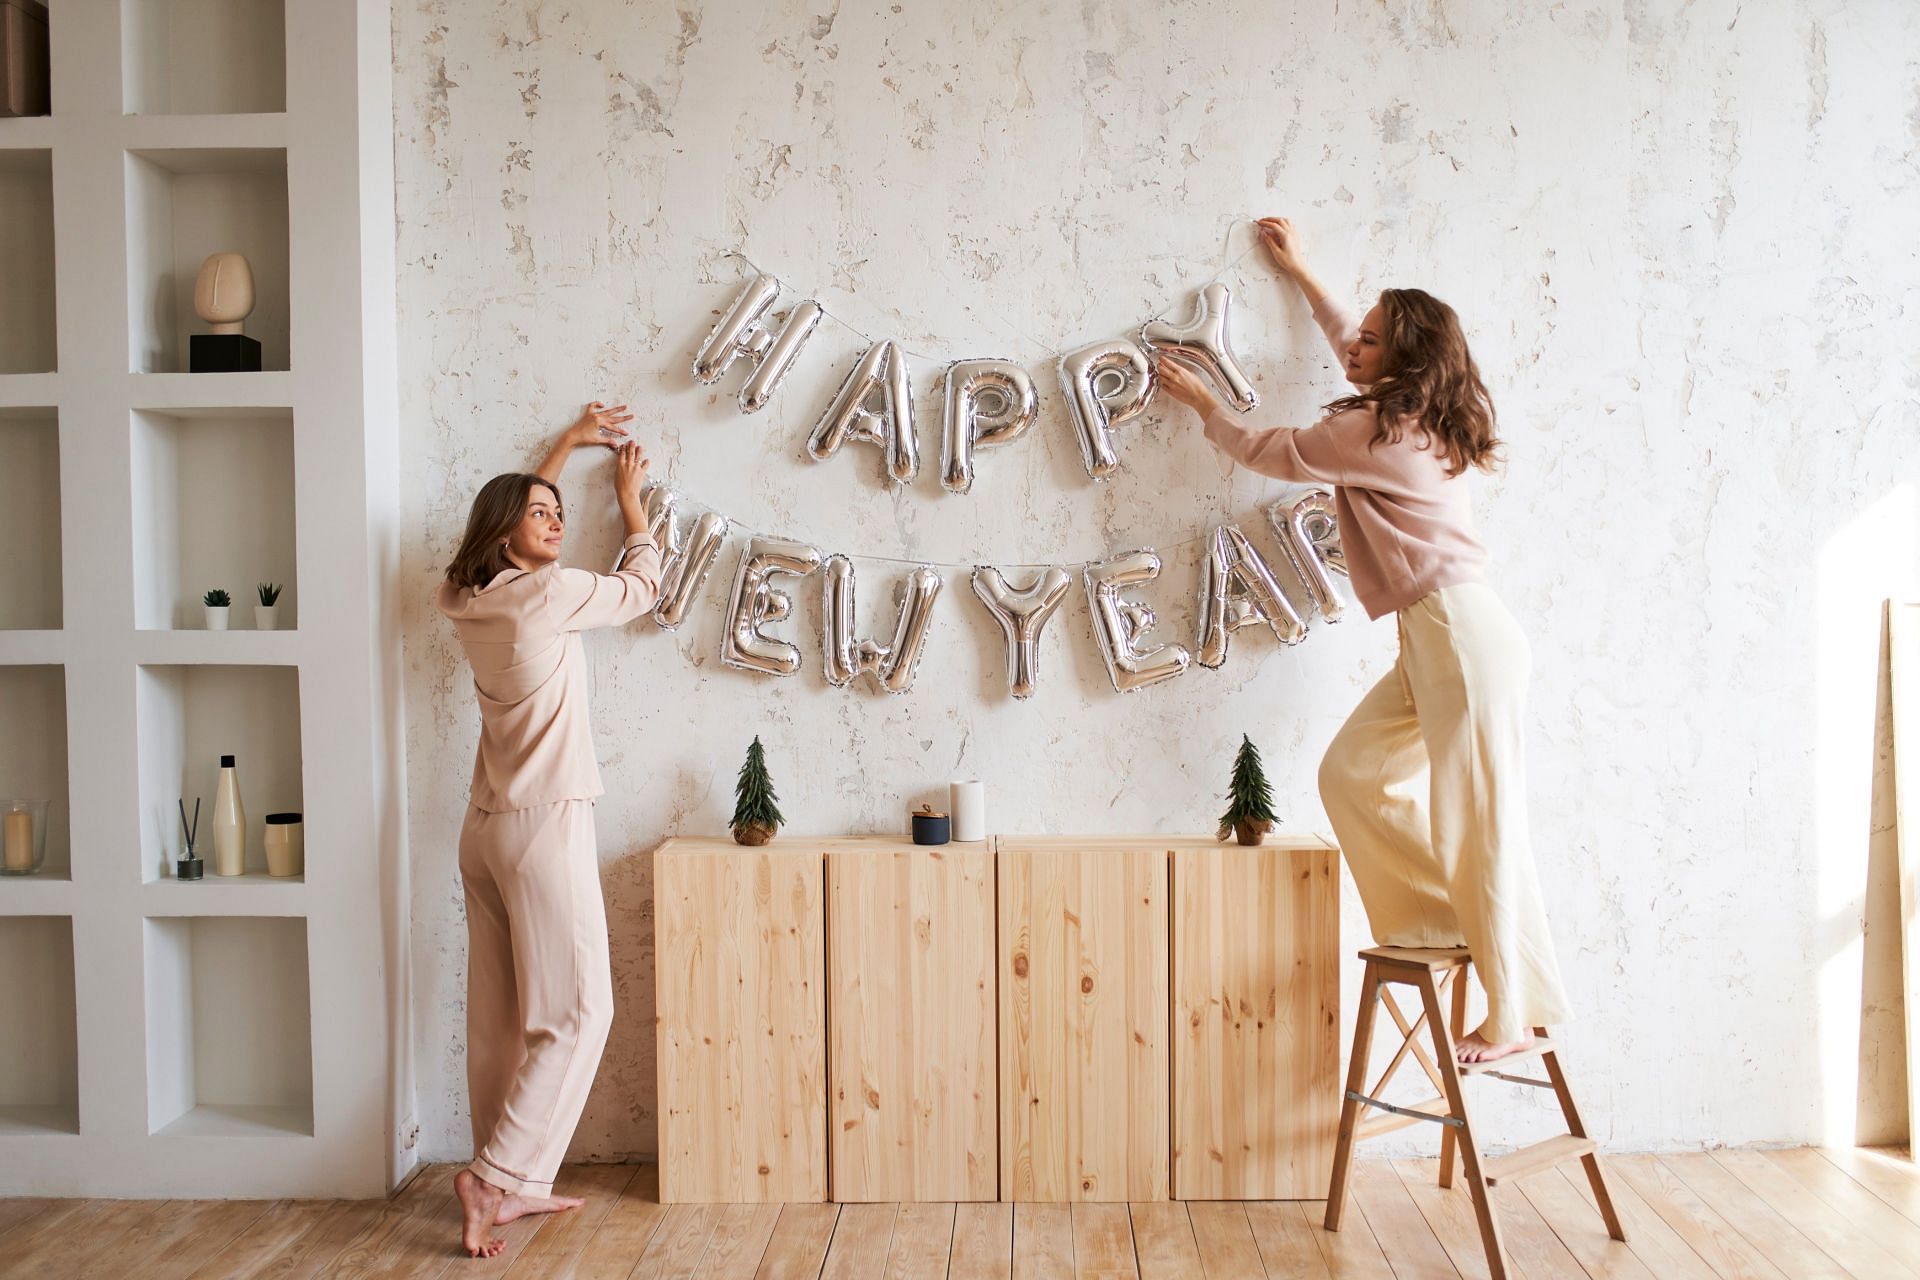 New year resolutions are not fake and can help you align your calendar year! (Image via Freepik/ Freepik)